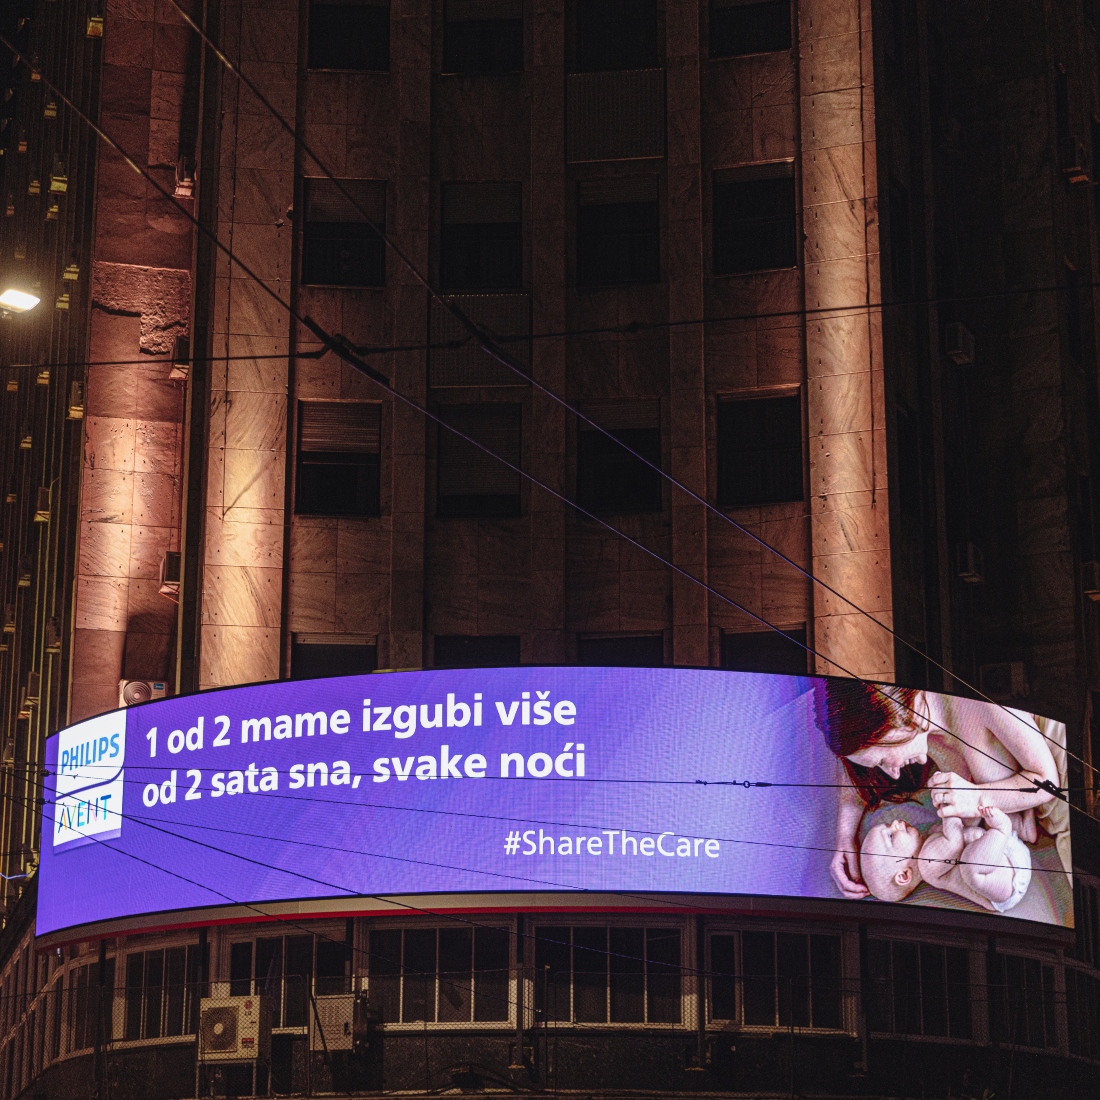 philips avent share the care (1)